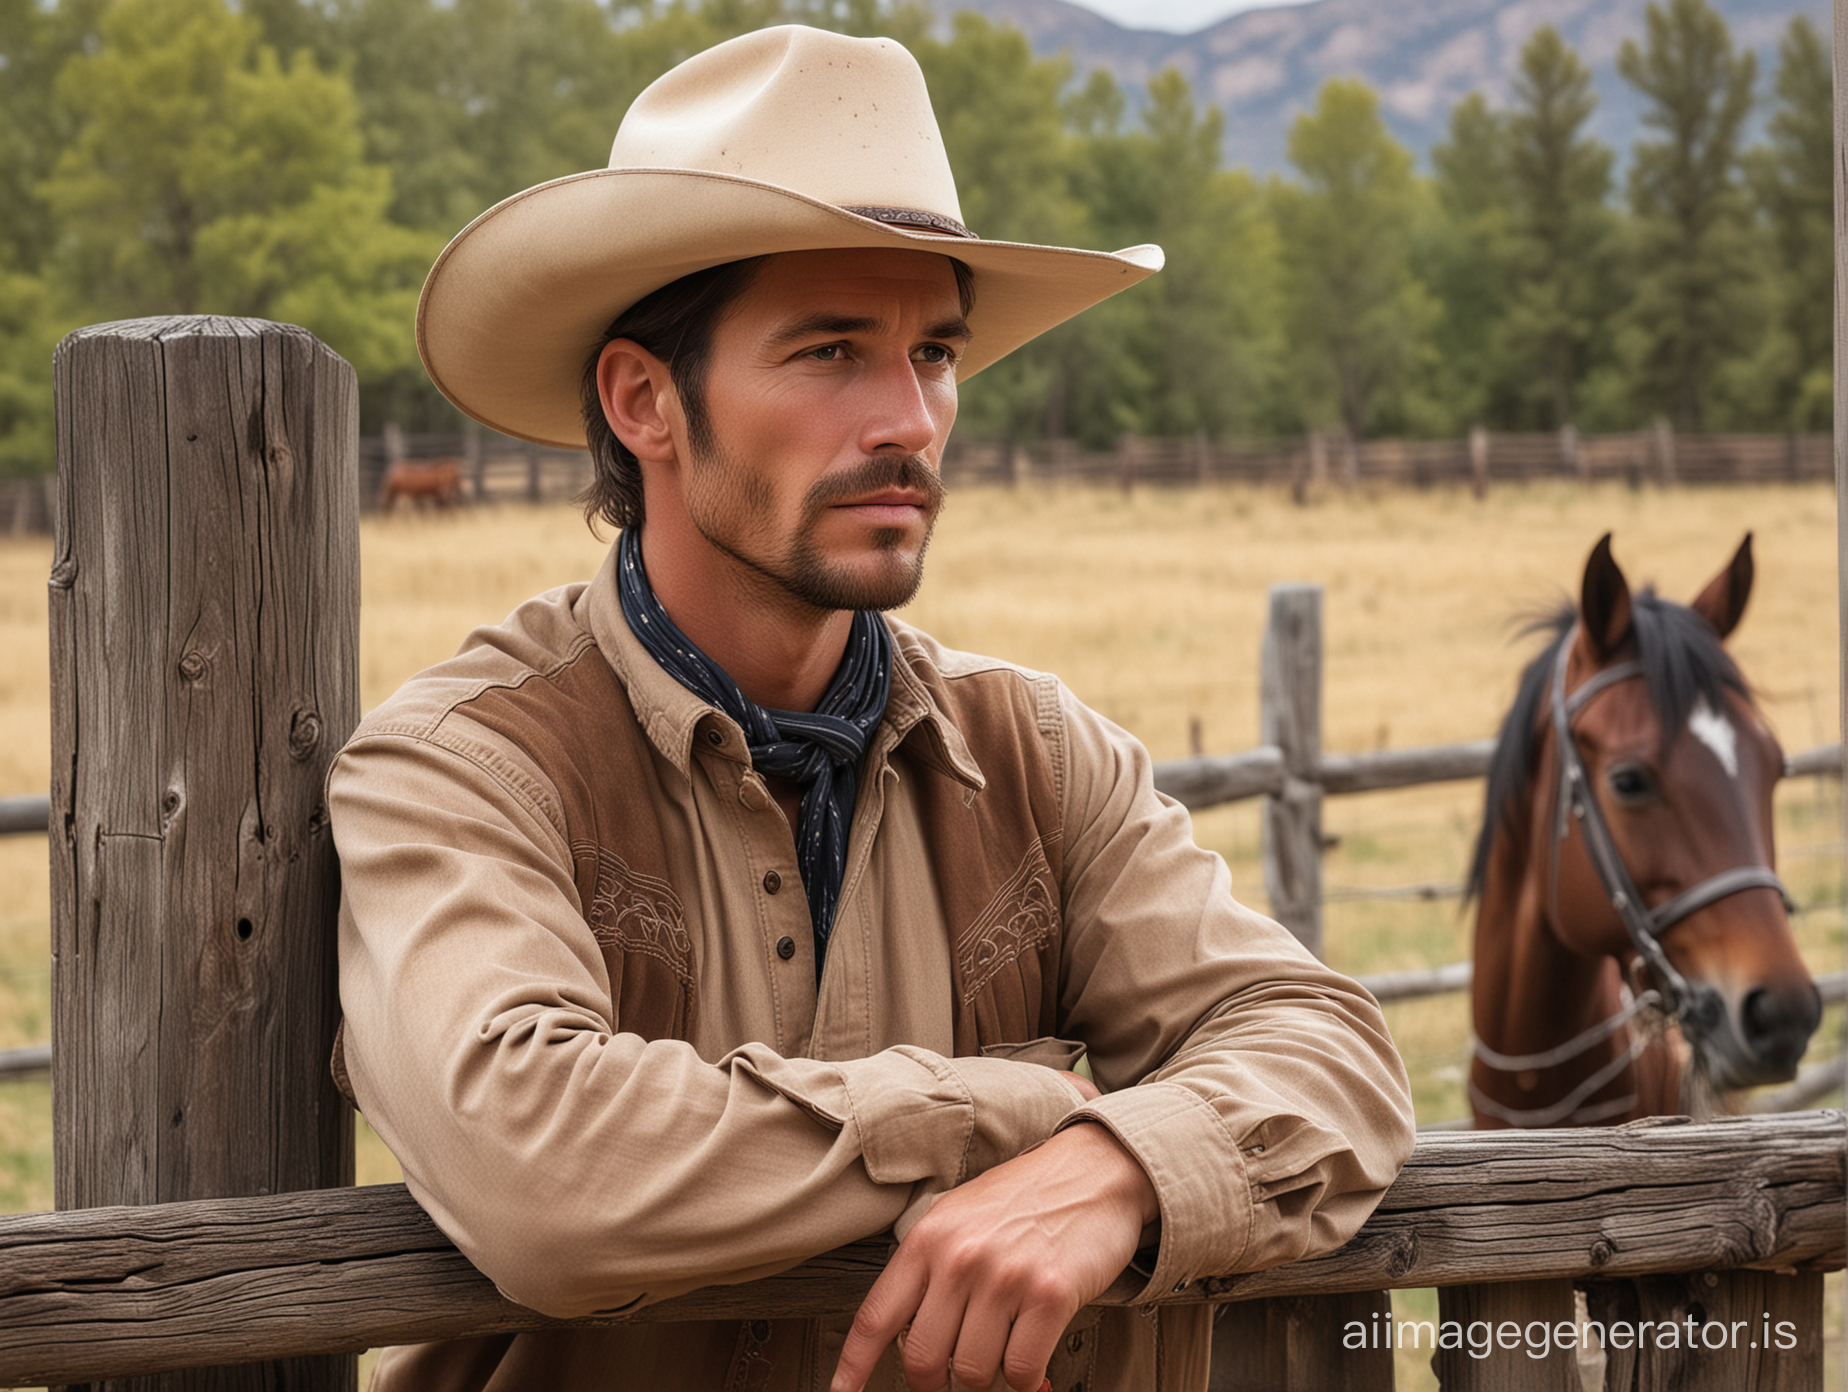 A detailed photograph of an cowboy with a thoughtful look about the meaning of life in simple rustic clothes near a wooden fence. There is a horse next to the  man